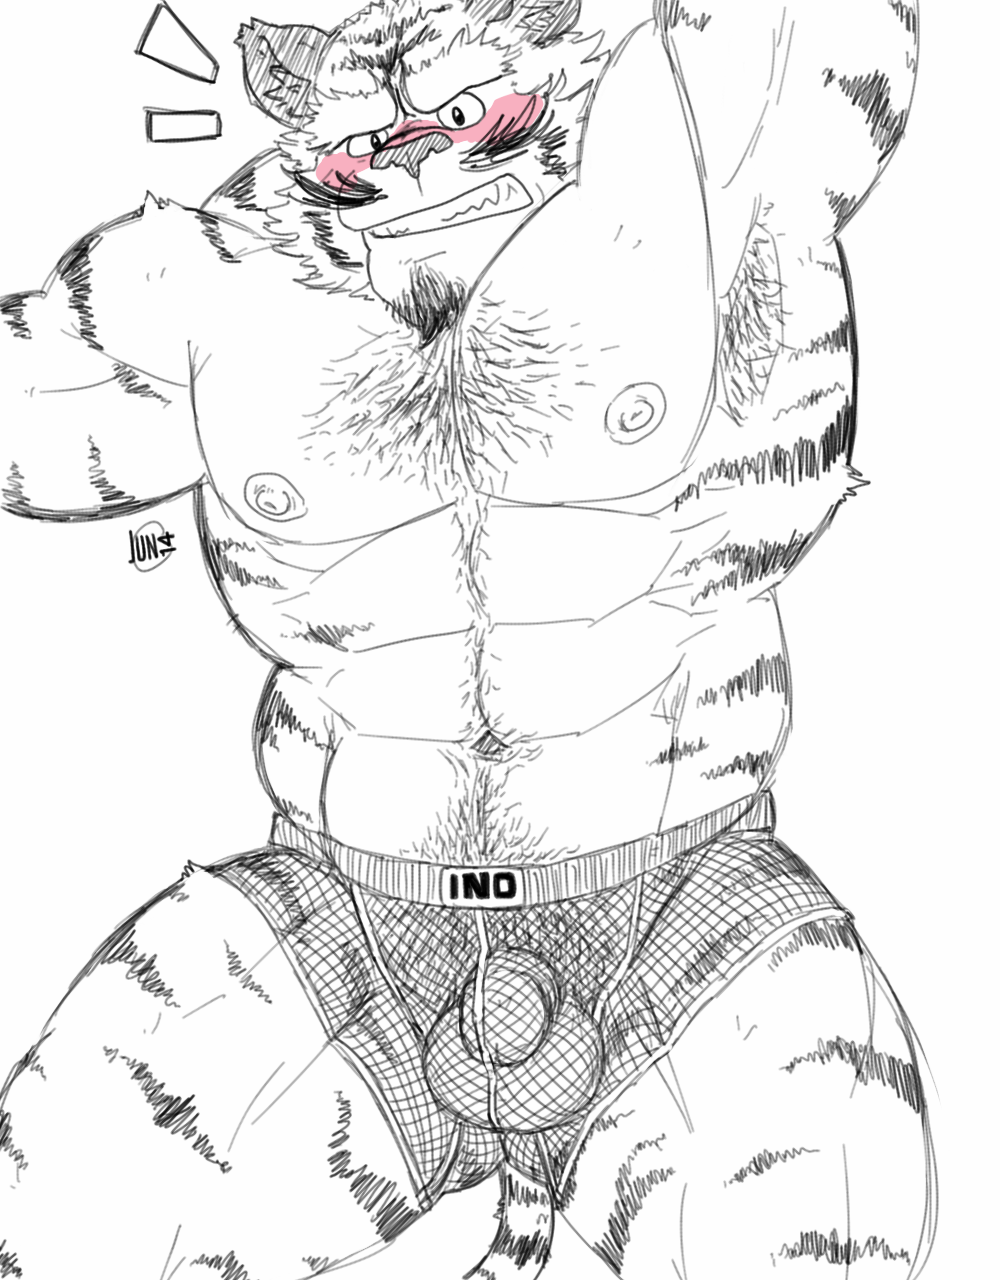 Have a tiger in fishnet underwear because there are people who like that kind of